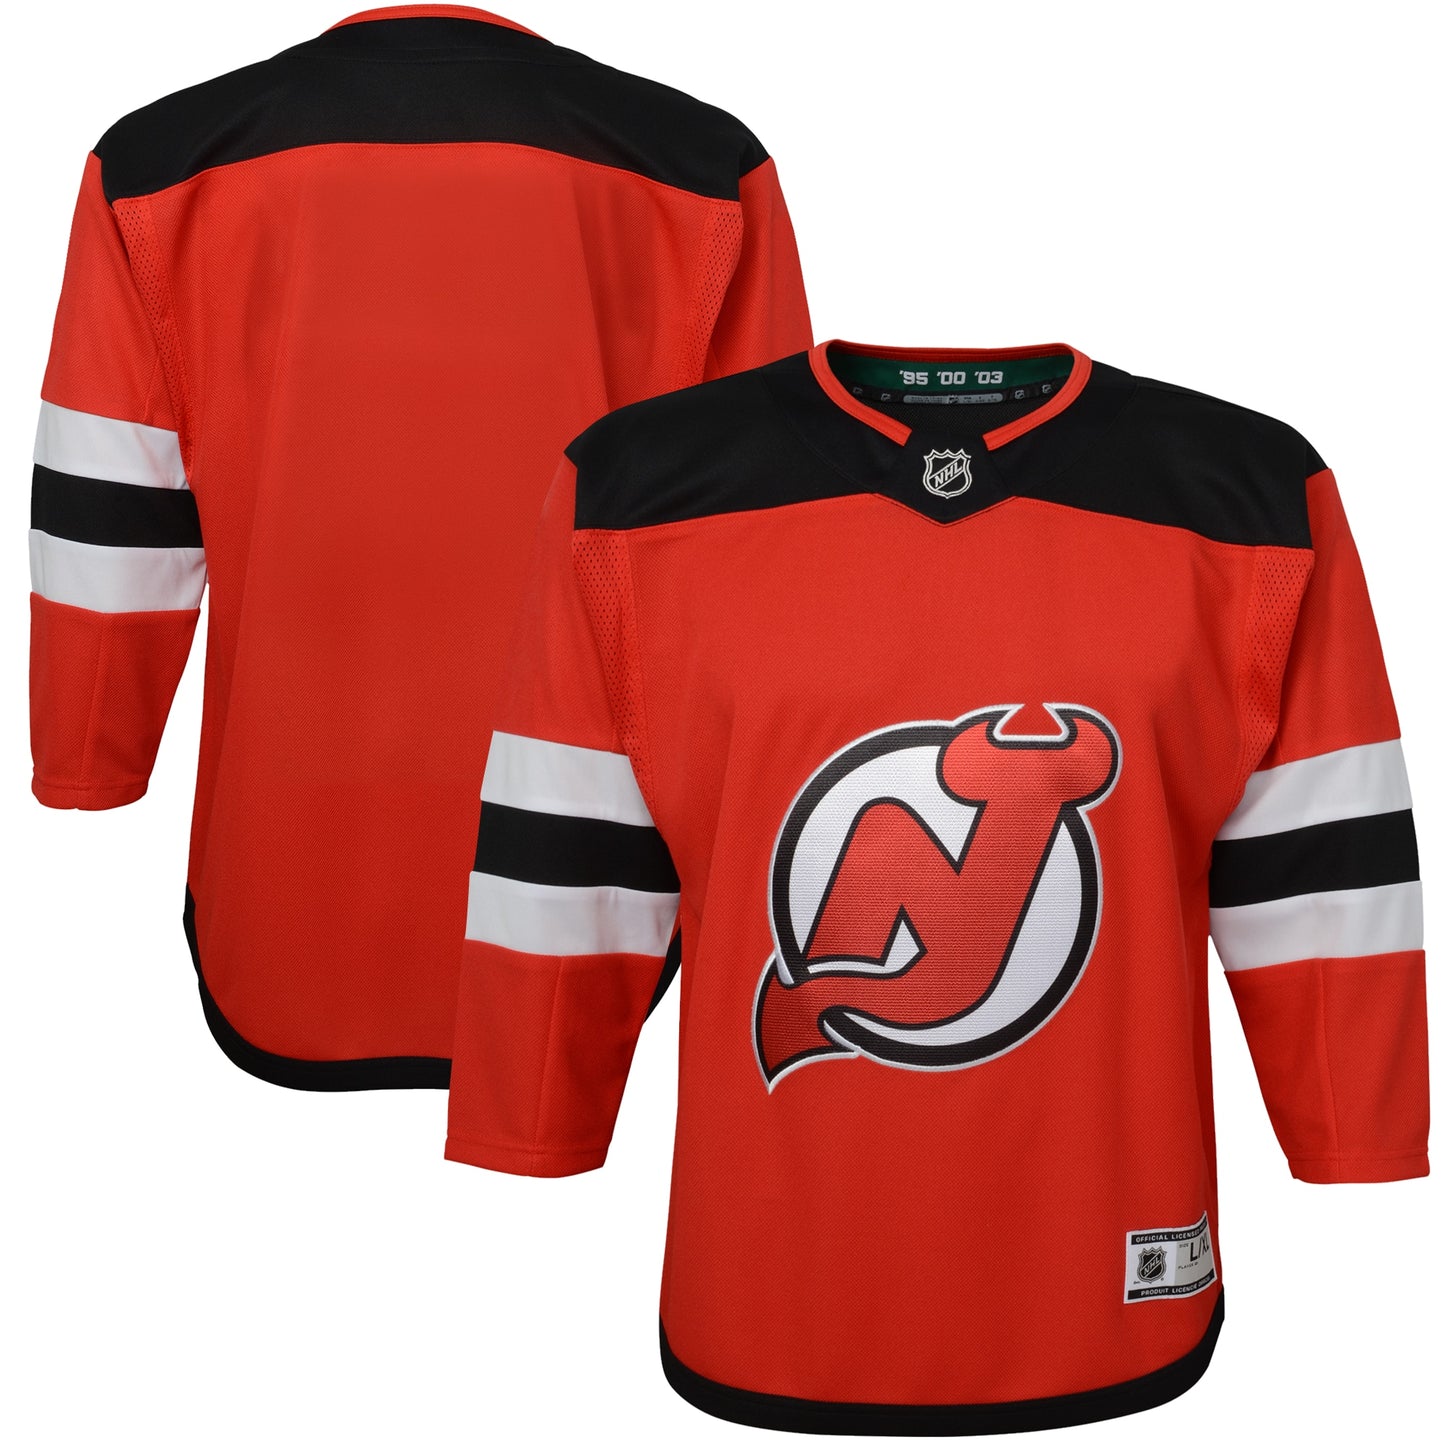 New Jersey Devils Youth Home Premier Blank Jersey - Red